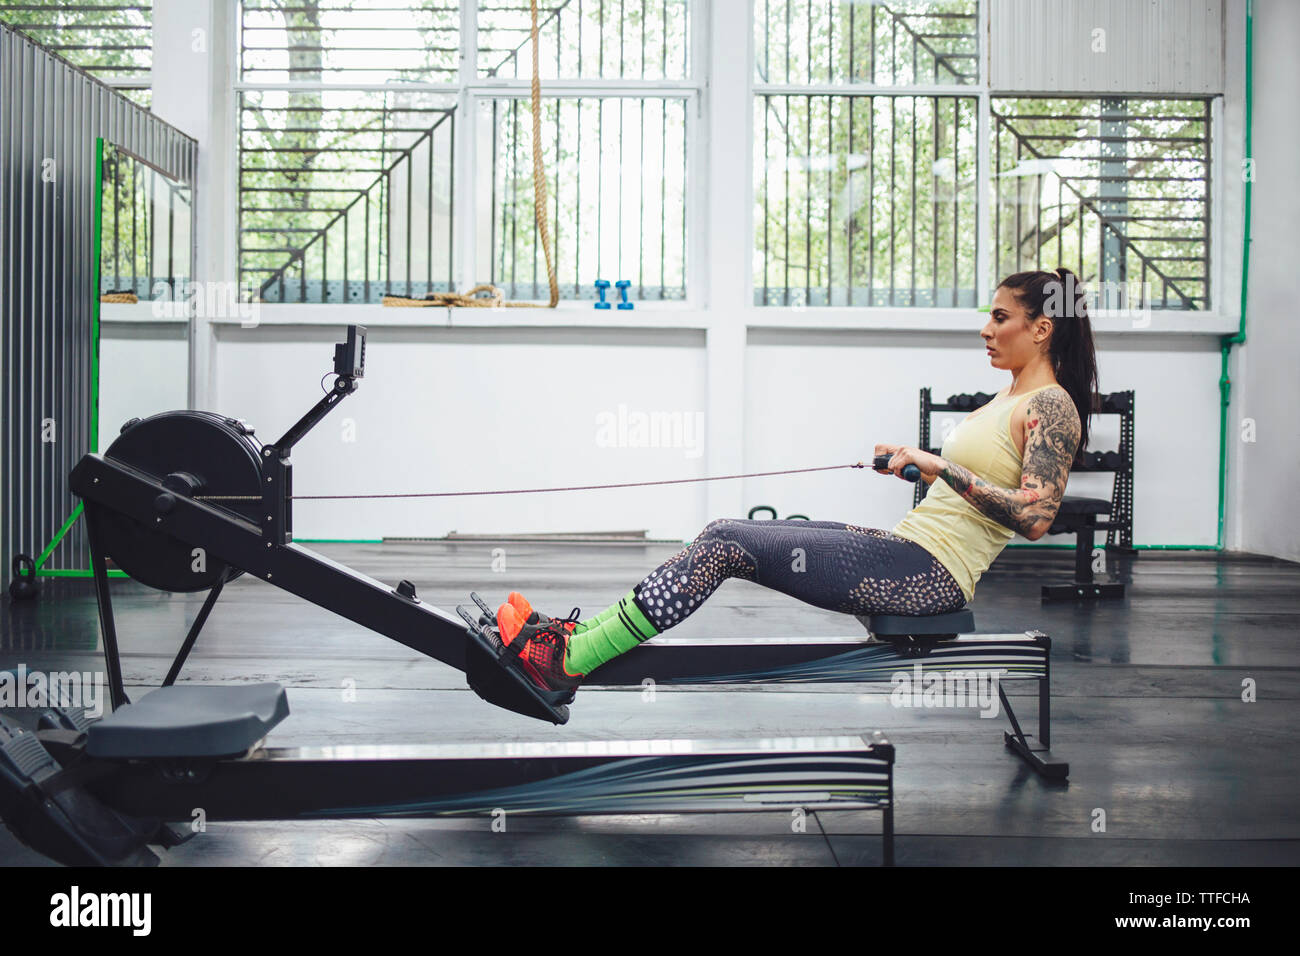 Athlete using rowing machine in gym Stock Photo